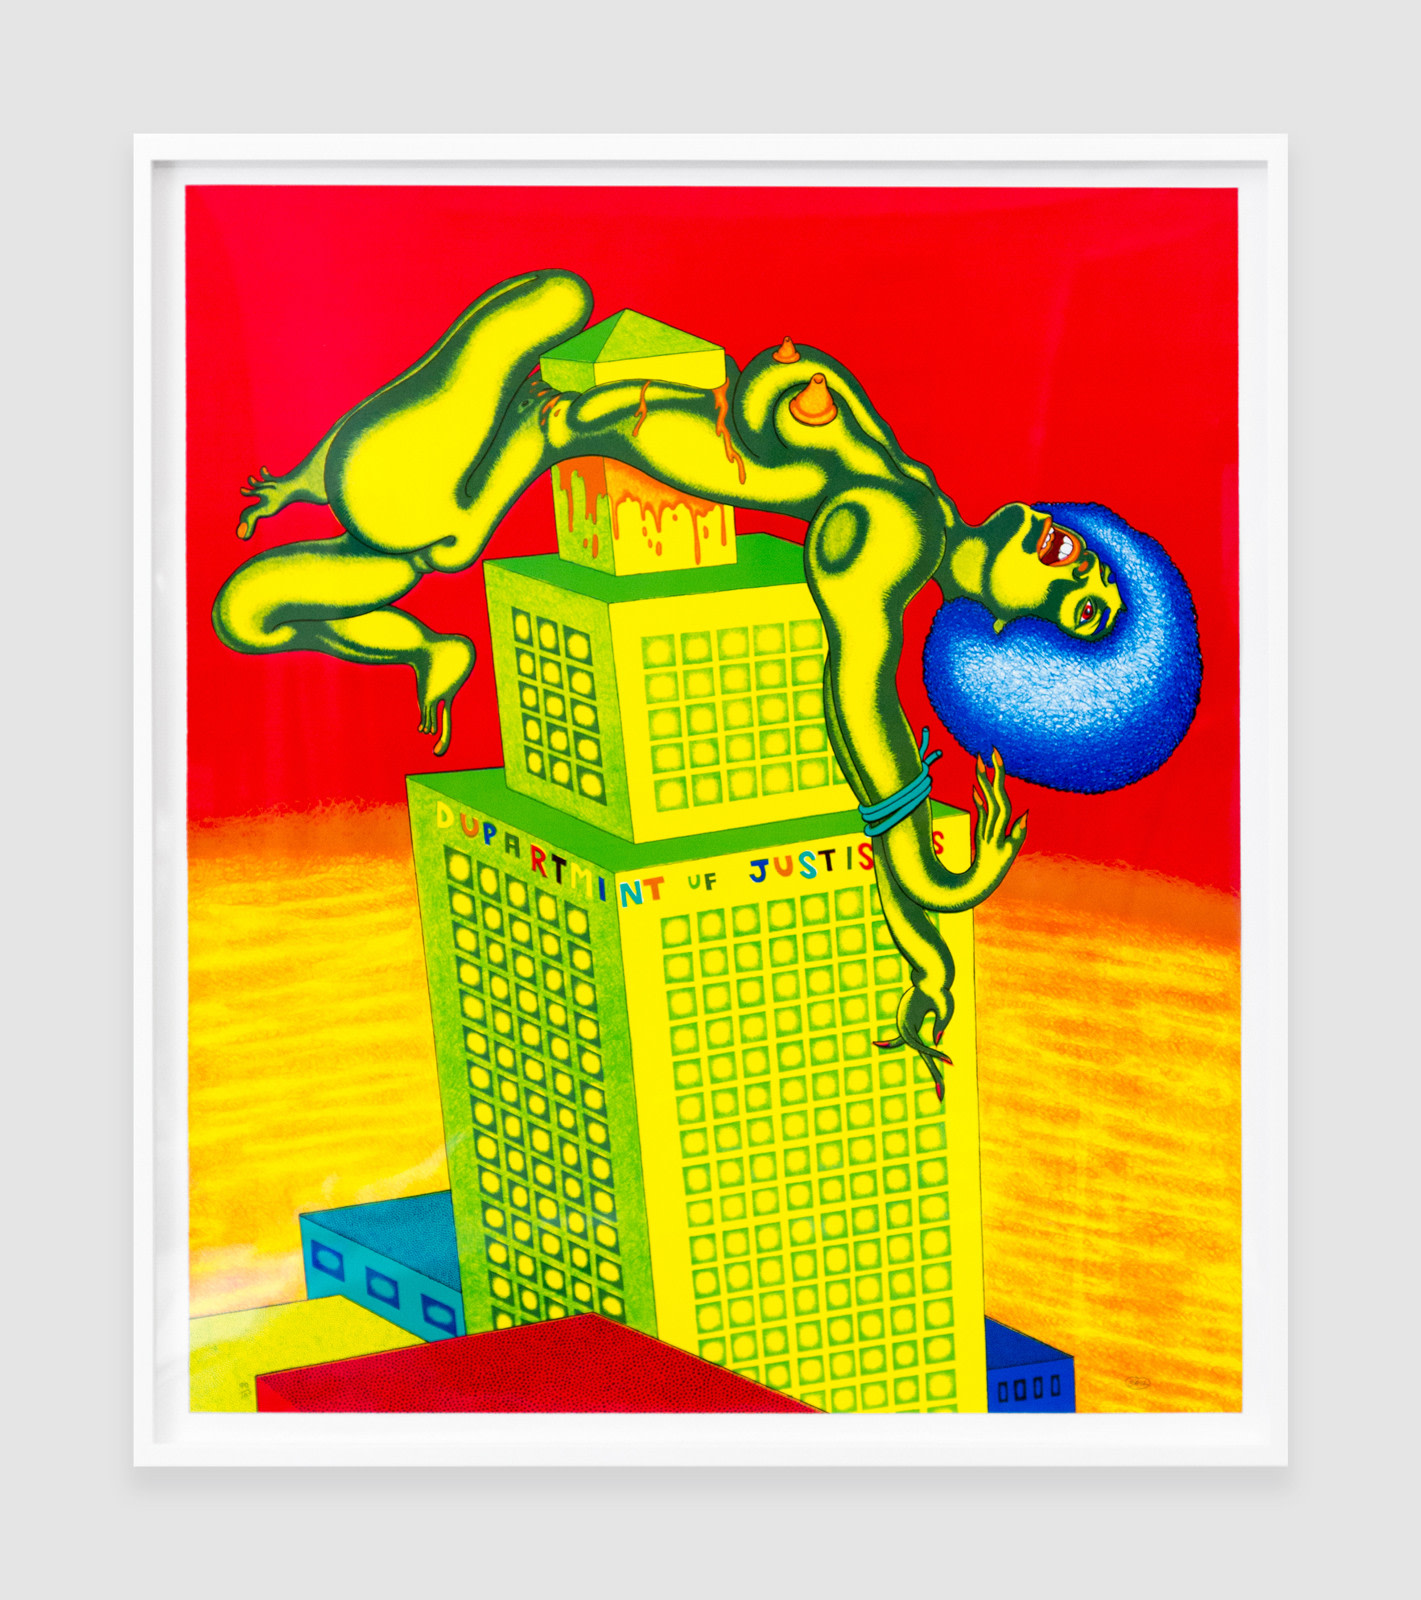 Peter Saul: Prints (1968-1975) - All proceeds for the benefit of - Viewing Room - Venus Over Manhattan Viewing Room